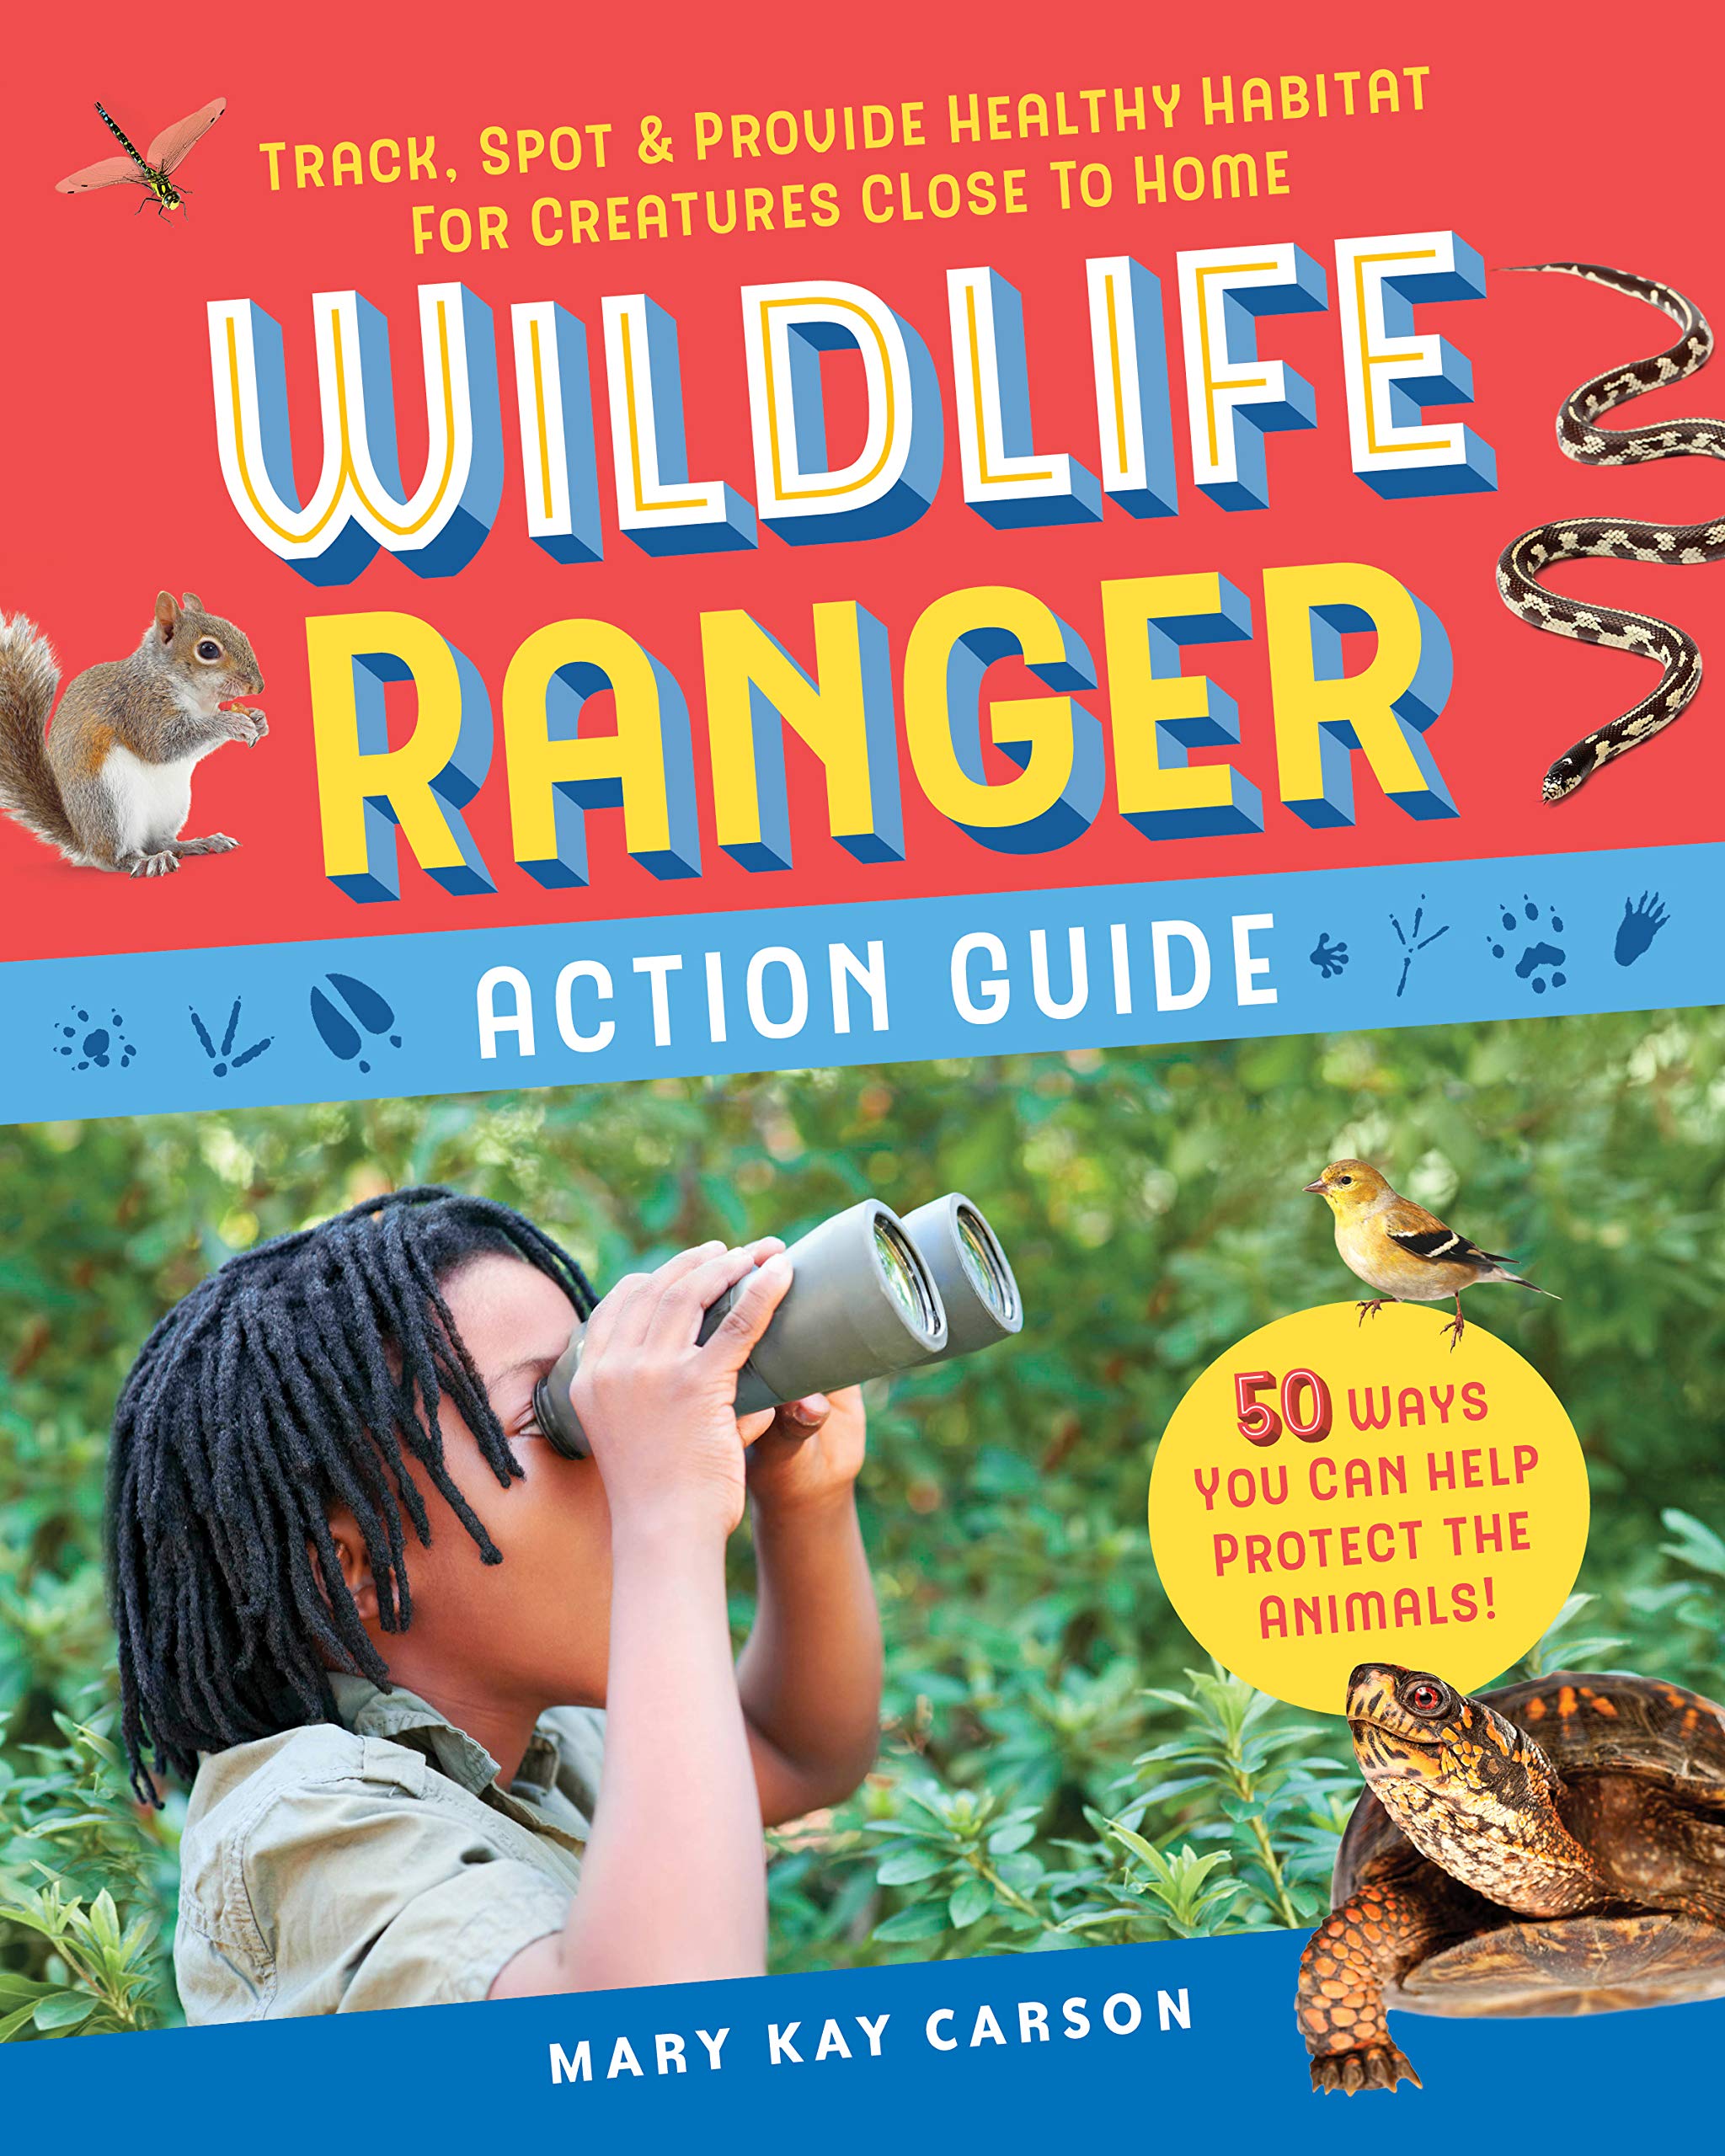 Wildlife Ranger Action Guide: Track, Spot & Provide Healthy Habitat for Creatures Close to Home